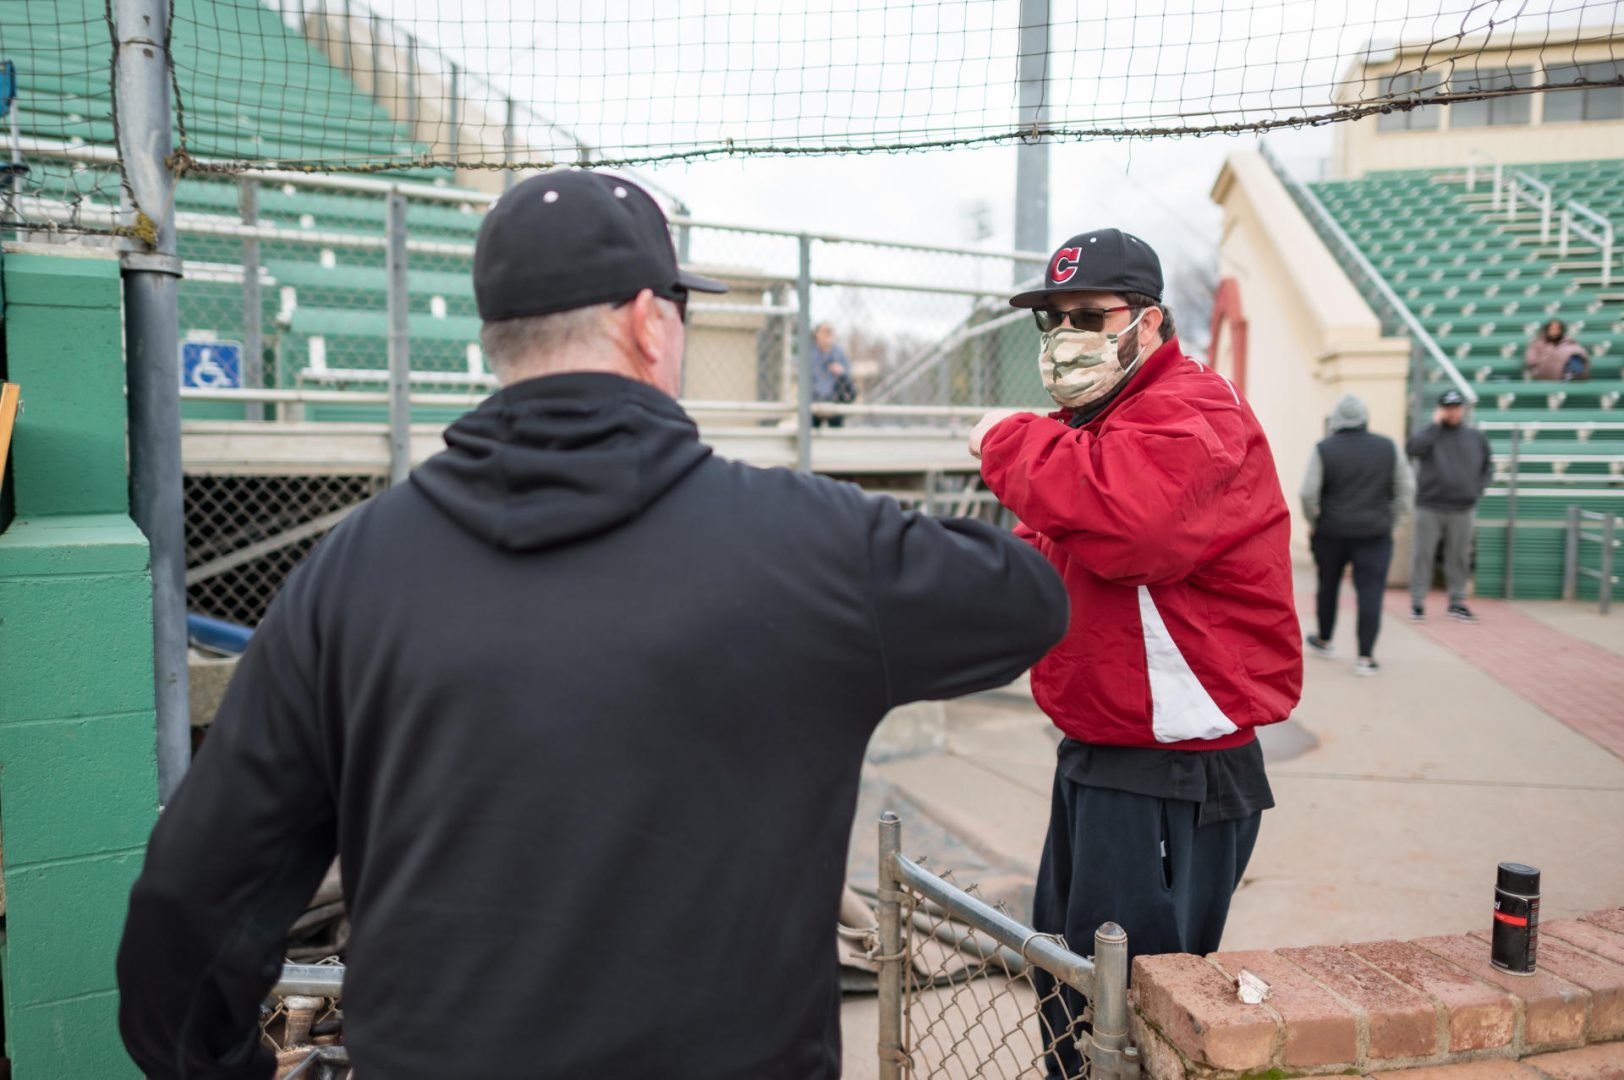 Chico State baseball superfan John Brownell shares an elbow bump with Head Coach Dave Taylor following the Wildcats' season-opening 14-2 victory.